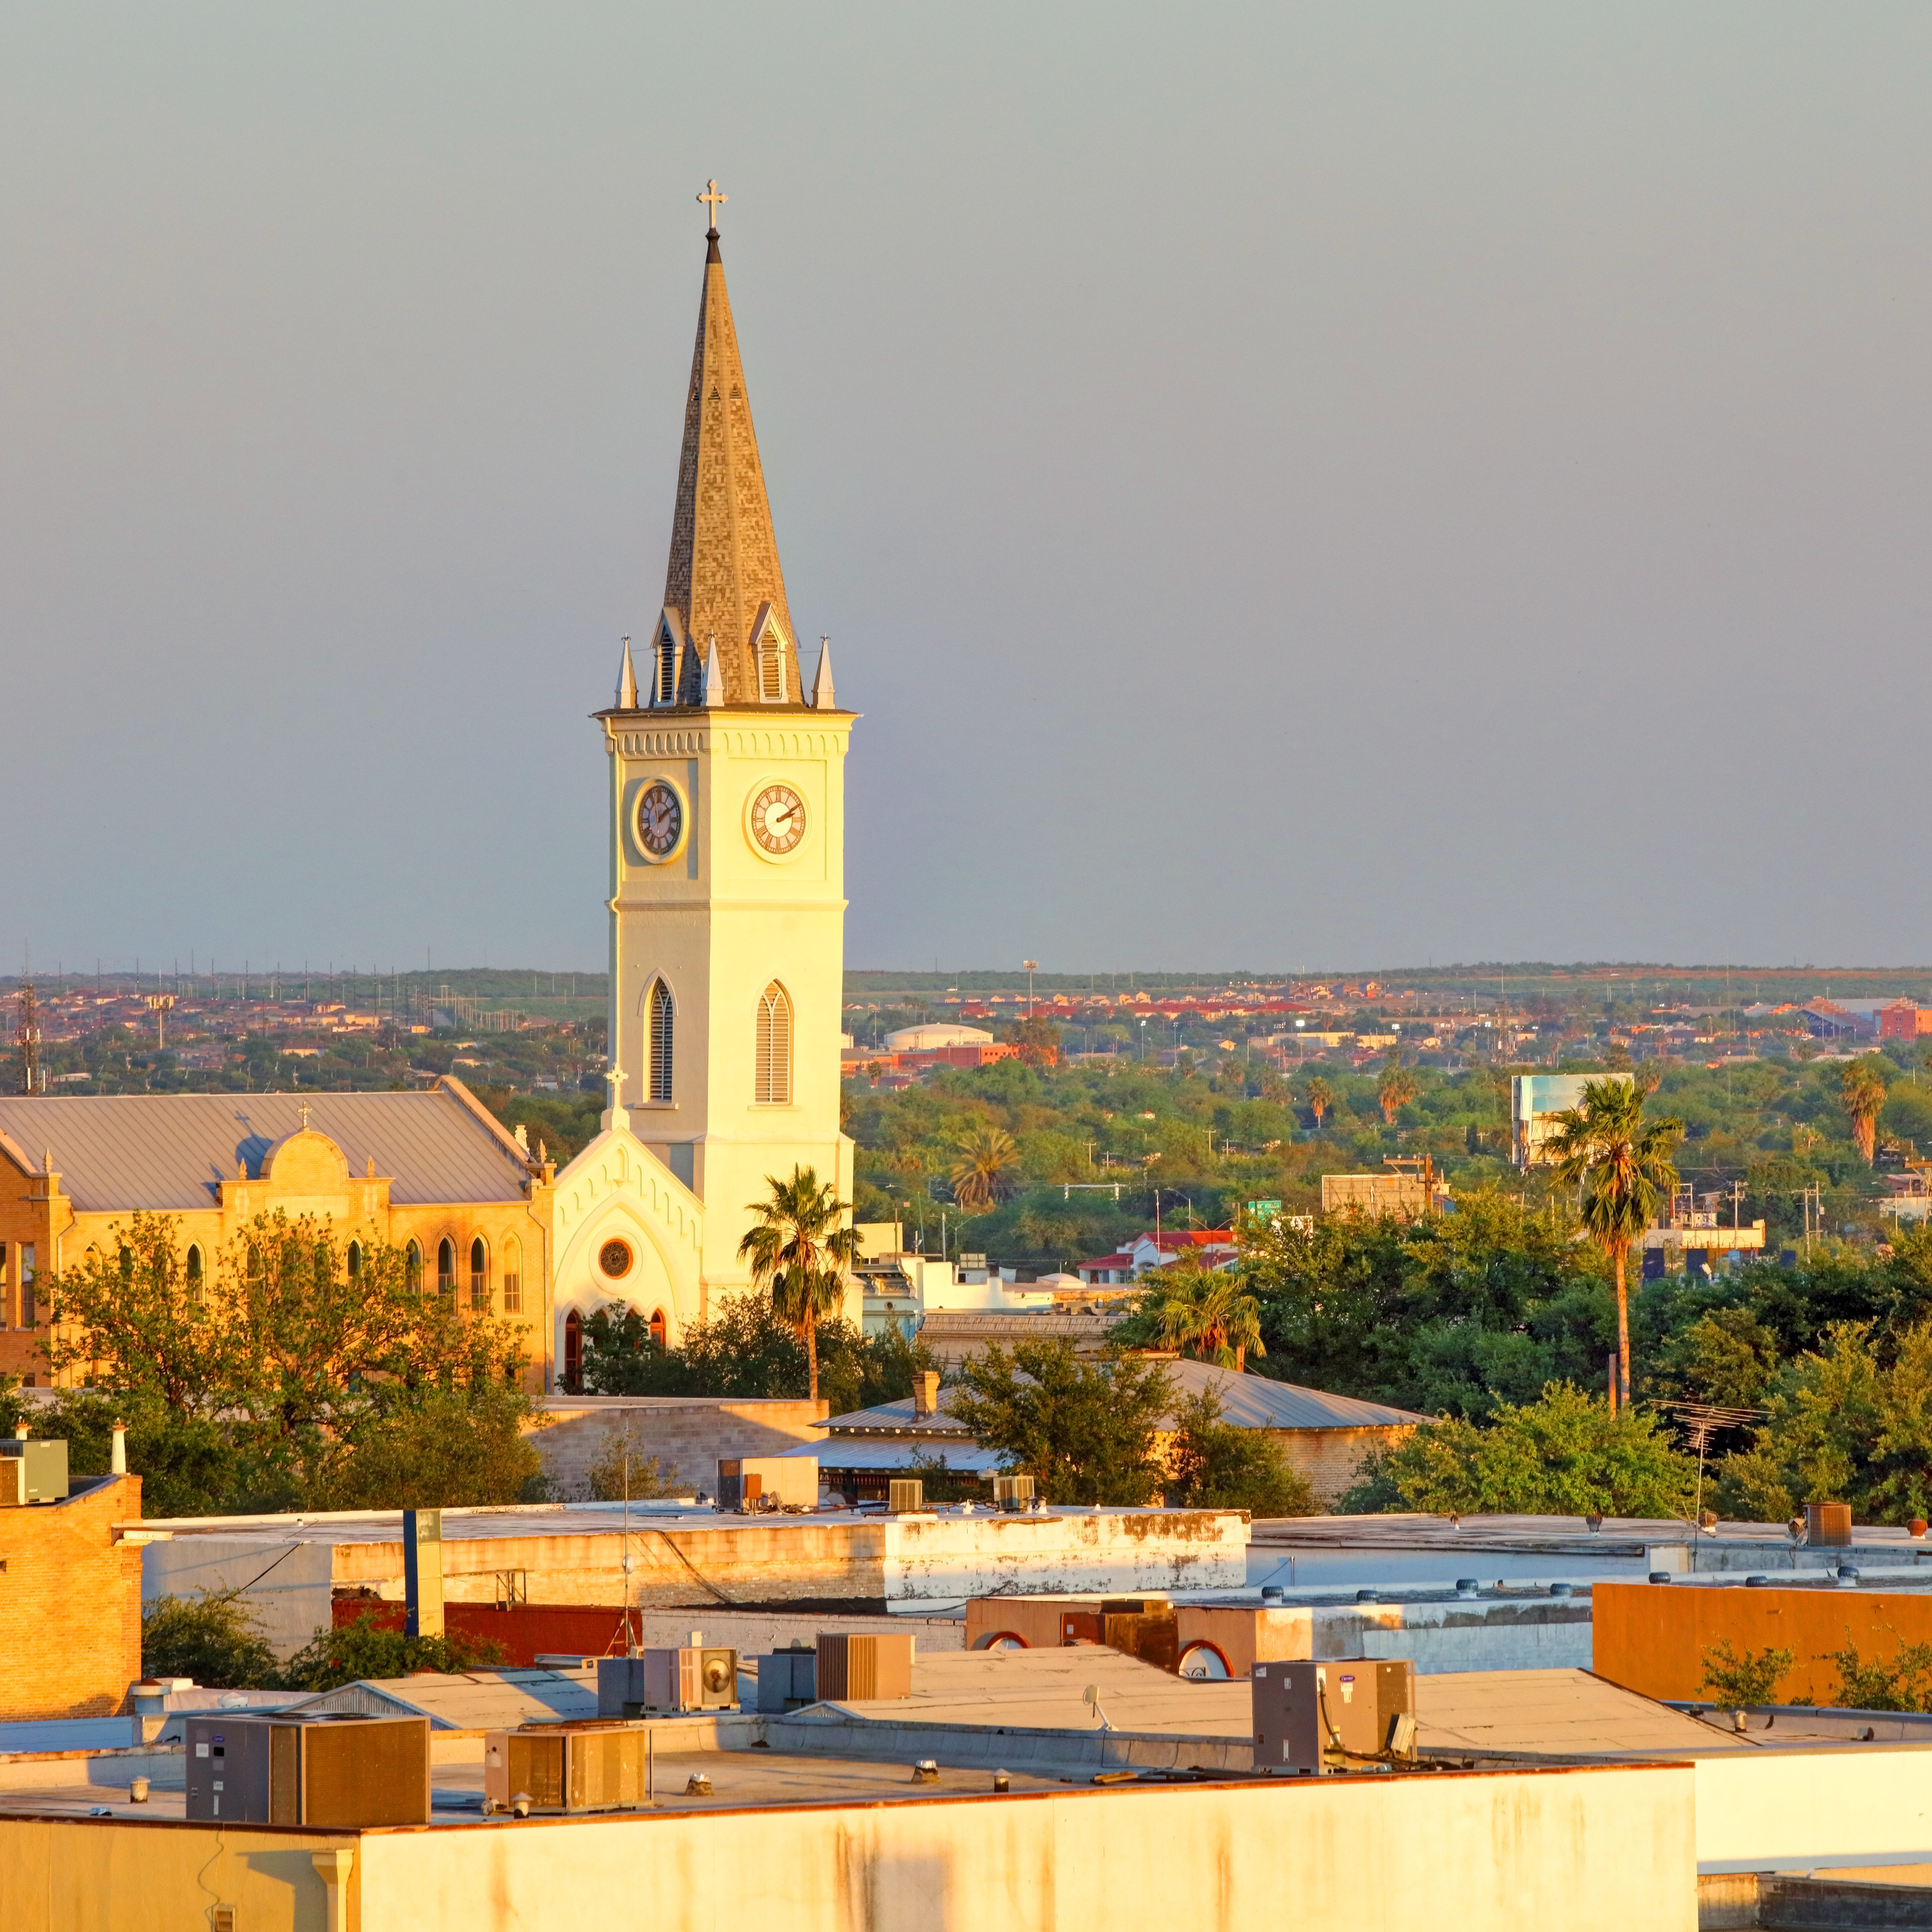 Laredo is the county seat of Webb County, Texas, United States, on the north bank of the Rio Grande in South Texas, across from Nuevo Laredo, Tamaulipas, Mexico.